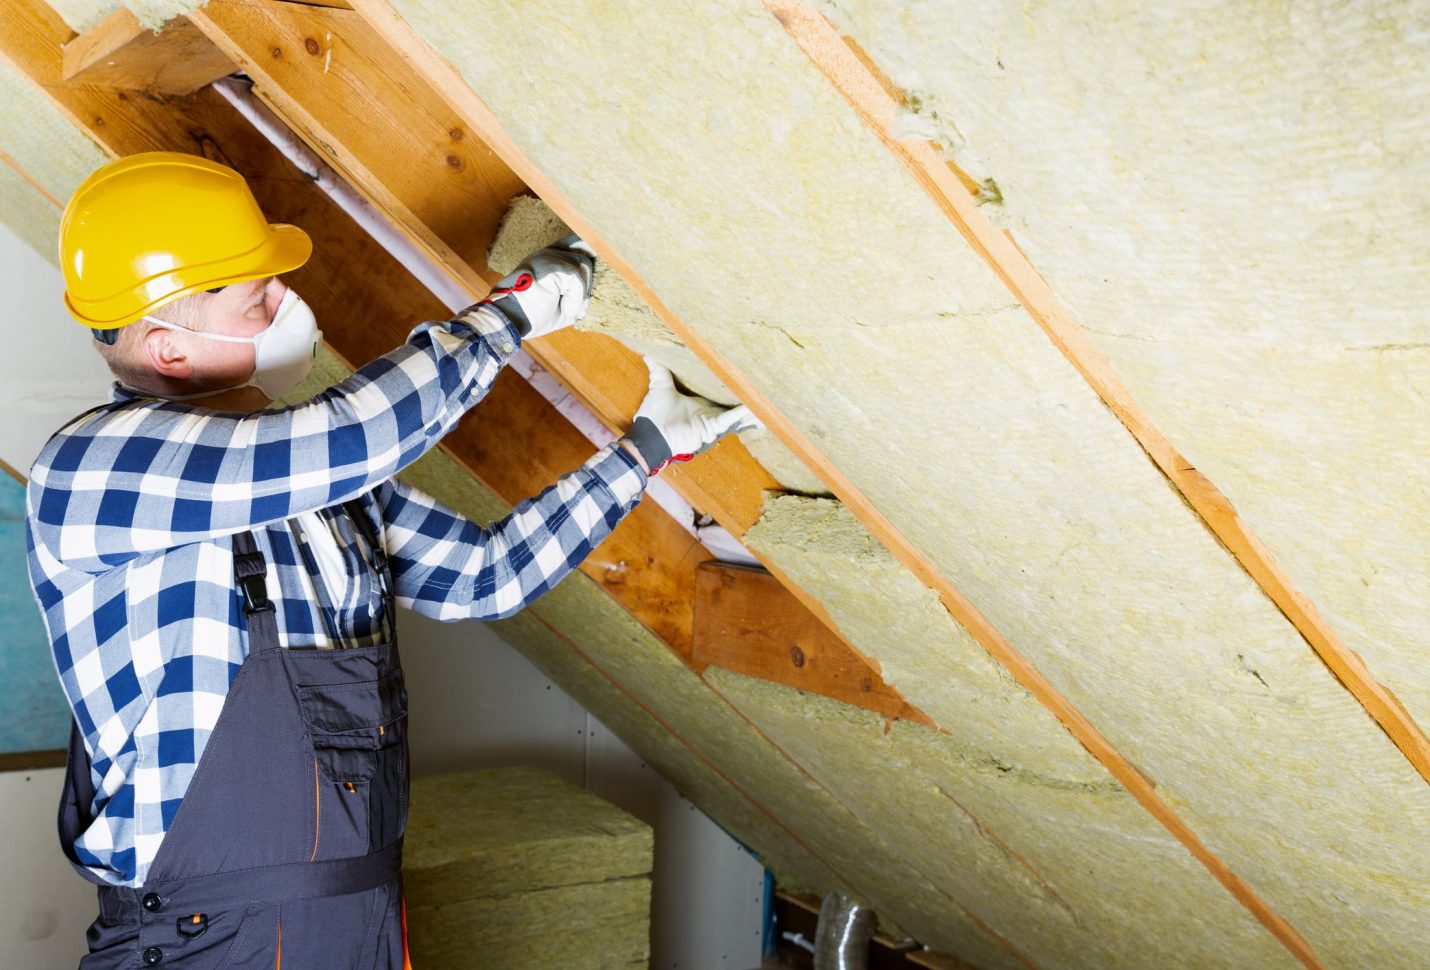 UK allocates £8.85 m to upskill people to make homes more energy efficient